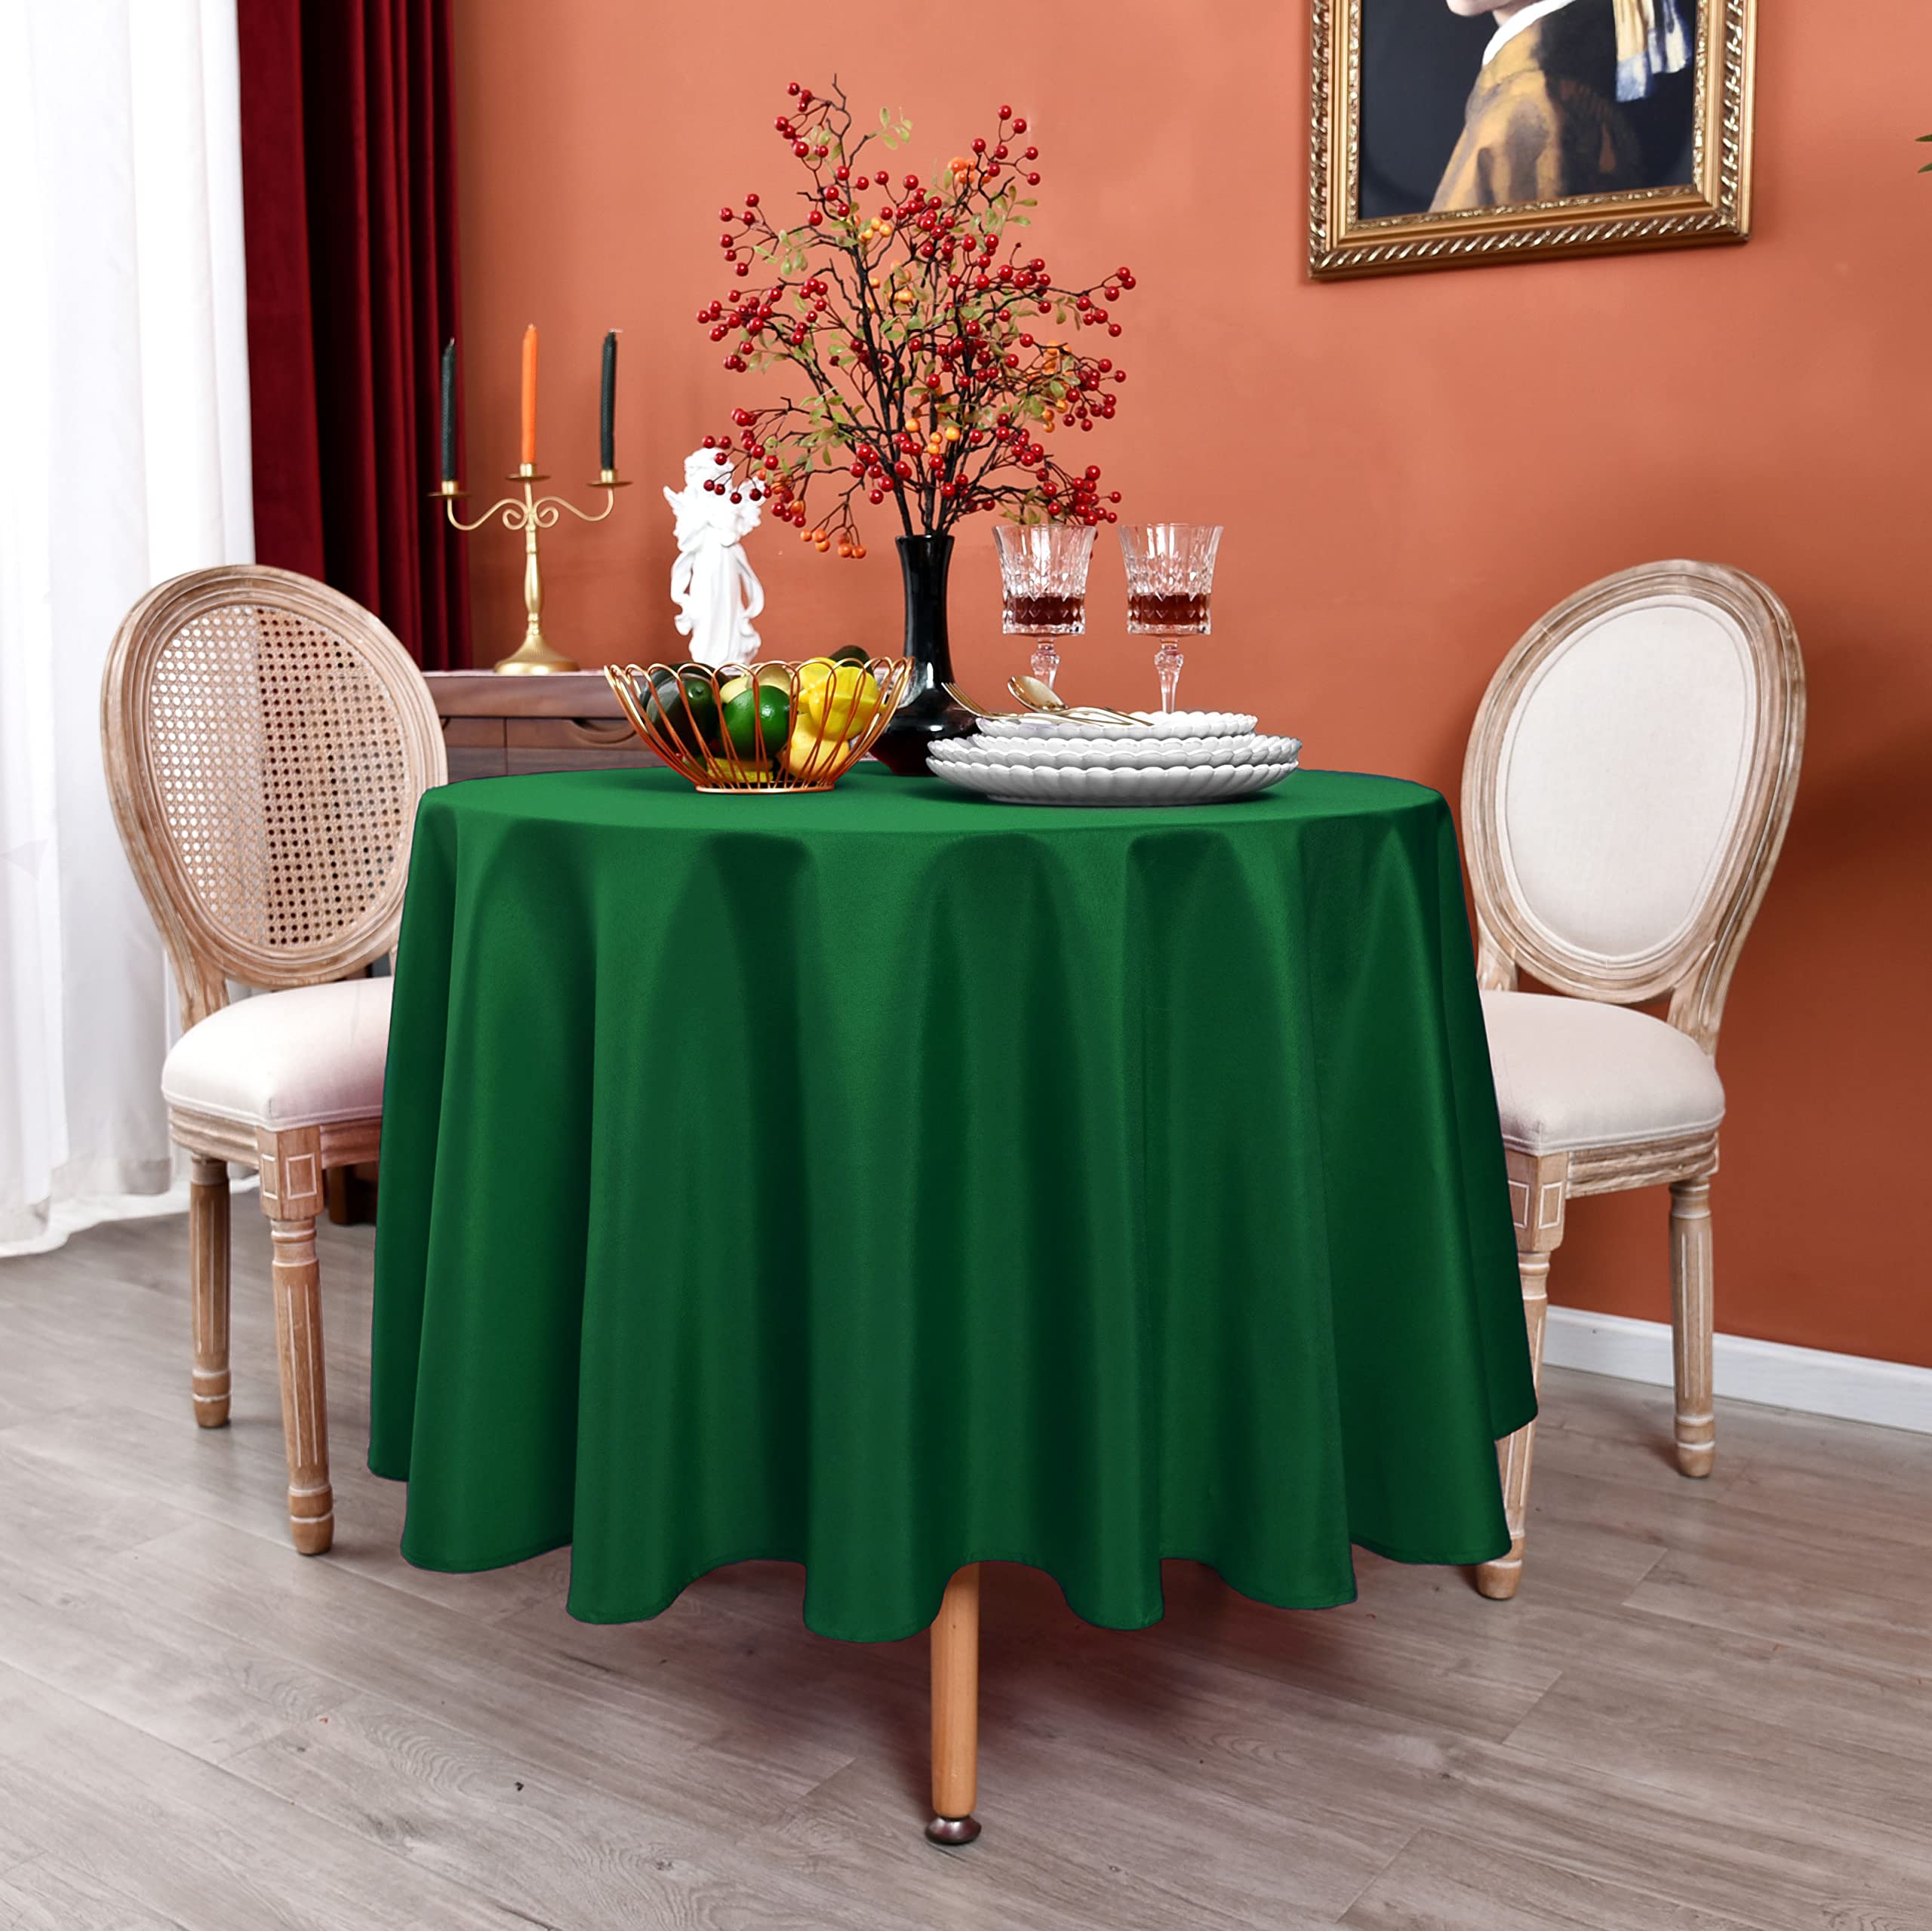 MEANMOY Green 210 GSM Water & Stain Resistant Round Tablecloth for Circle Table - Solid 48 Inch Table Cloth Cover in Wrinkle Free Durable Washable Polyester Fabric for Wedding, Party, Banquet, Dinner